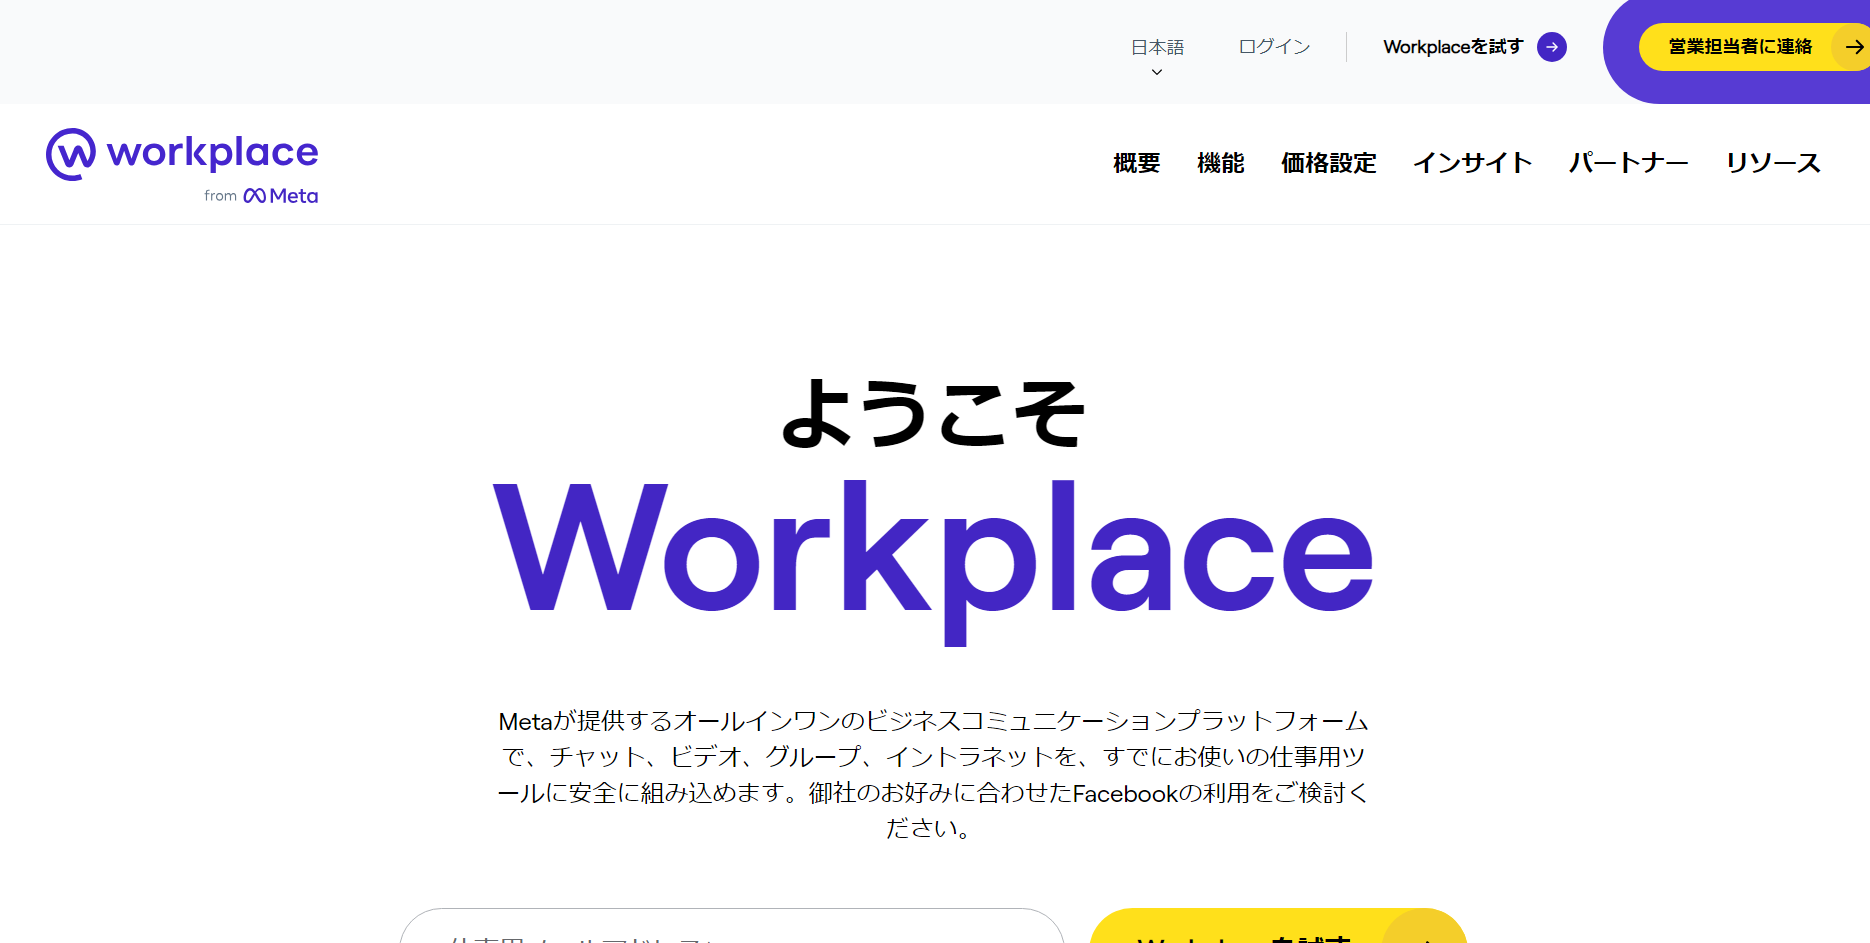 Workplace from Metaのトップ画像